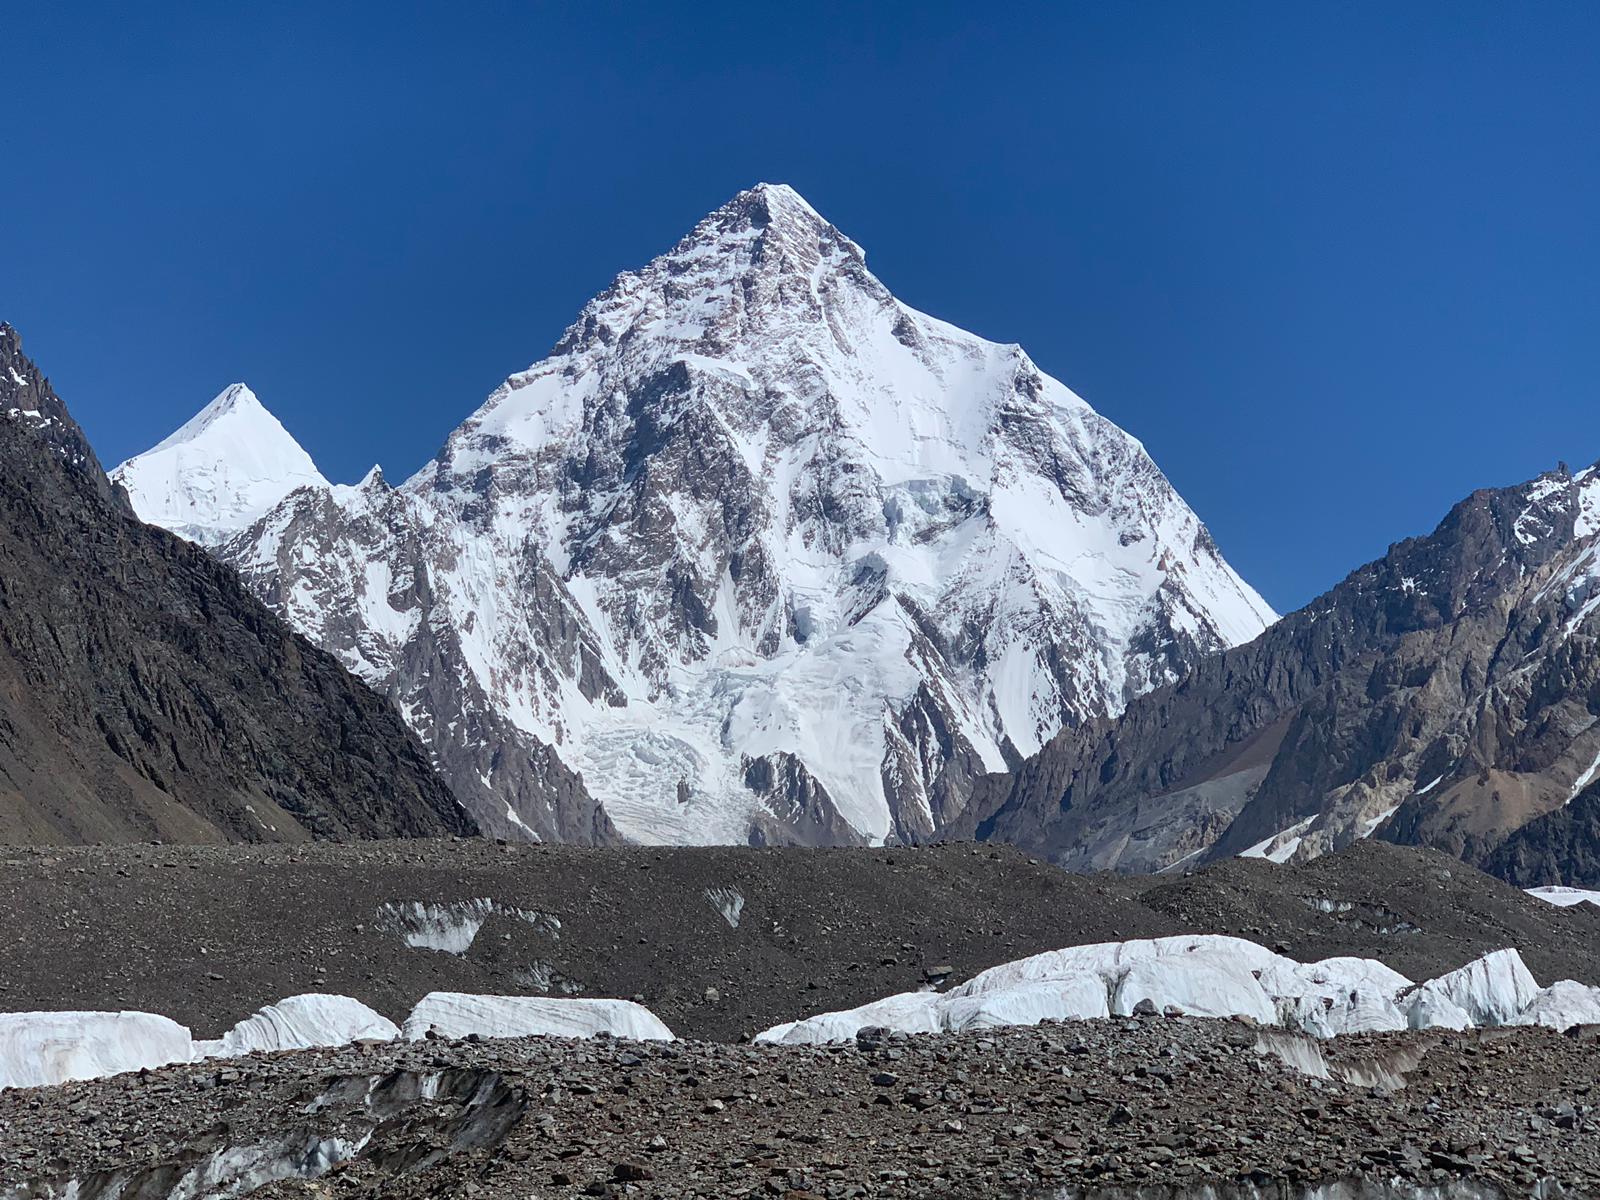 K2 stands tall - view from Concordia camp as we said good bye to the mountain